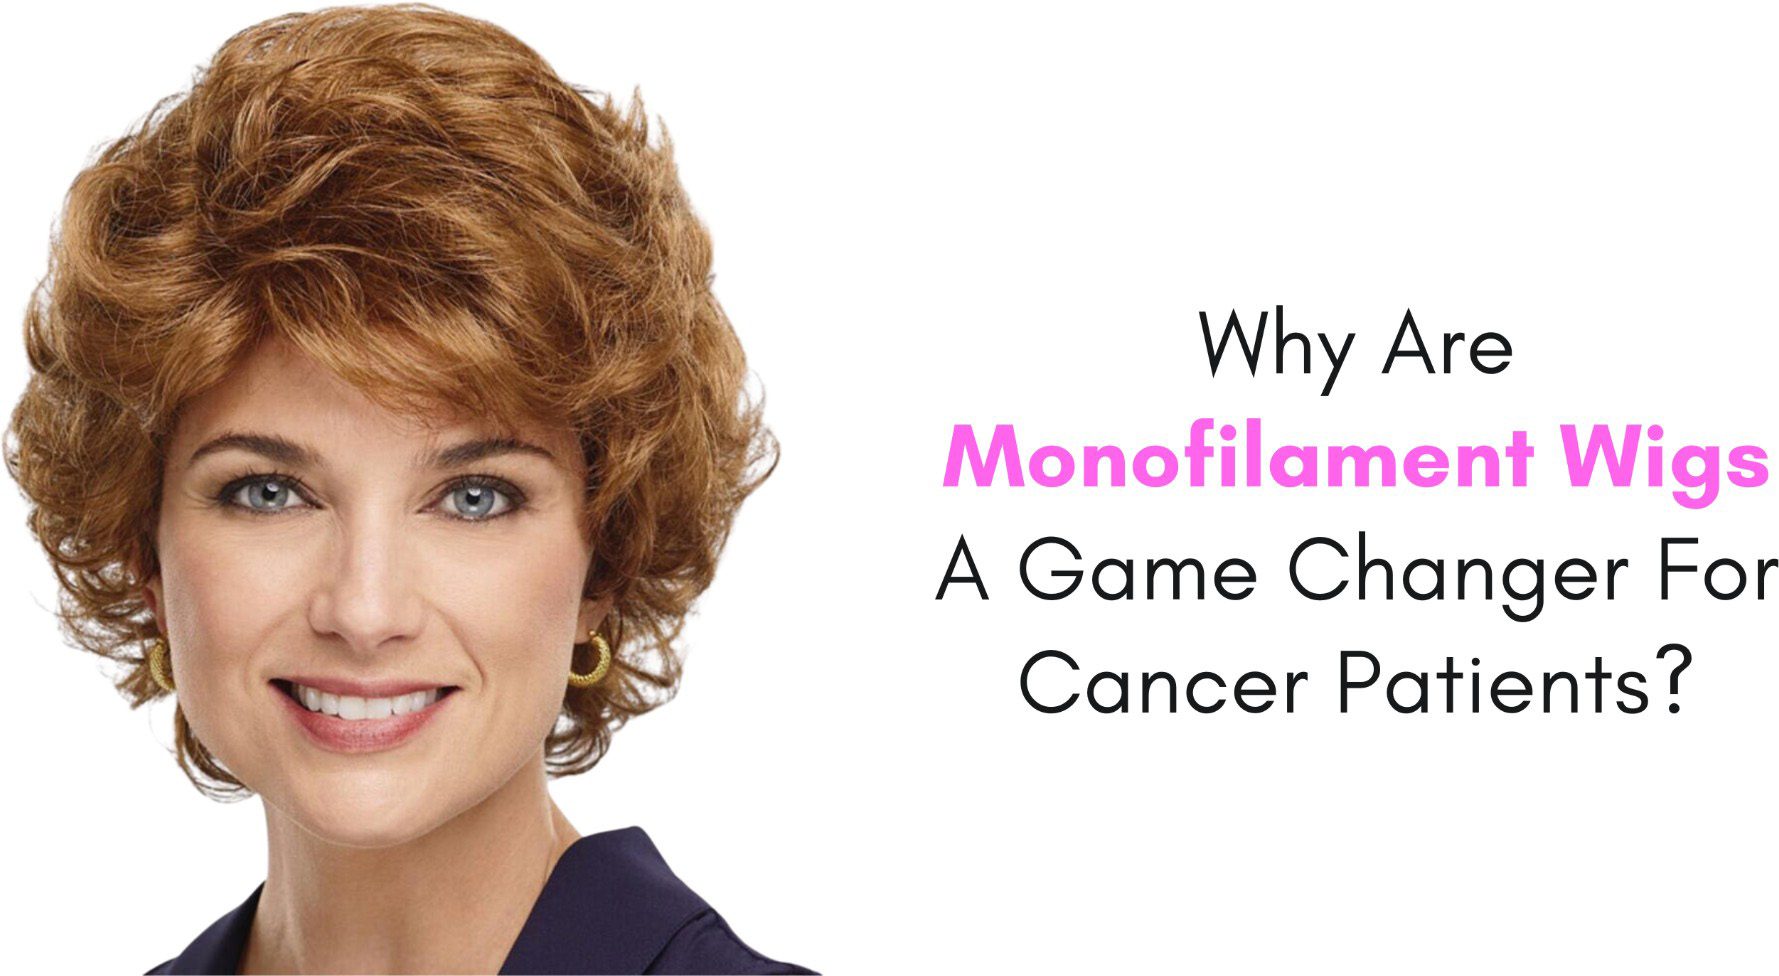 why are monofilament wigs a game changer for cancer patients